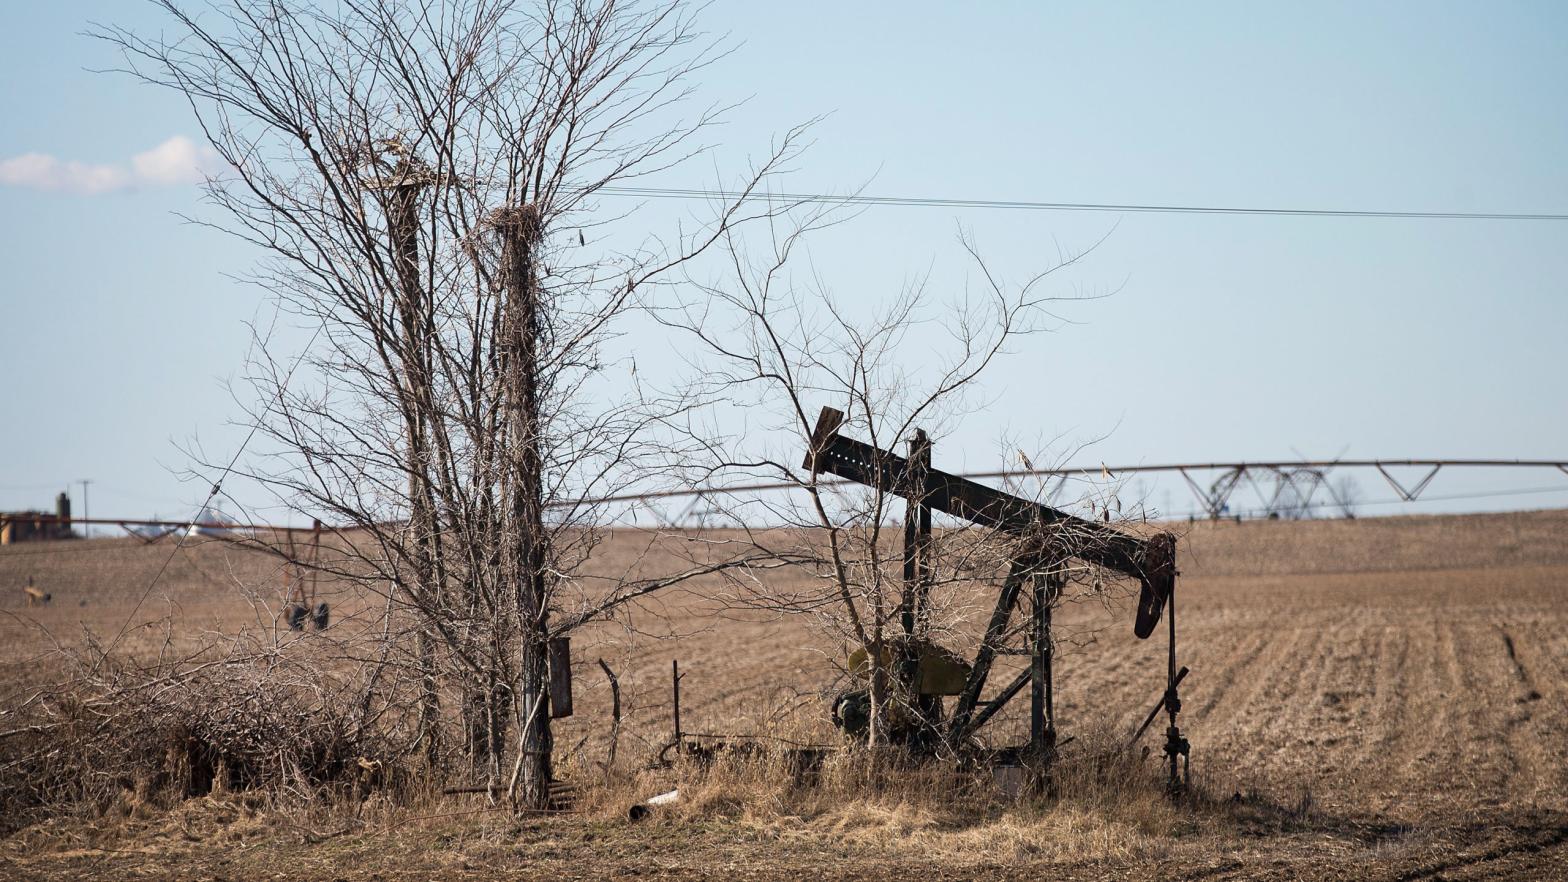 An idled pump jack, once used to extract crude oil from the ground, sits rusting above a well in a farmers field near Ridgway, Illinois. (Photo: Scott Olson/, Getty Images)